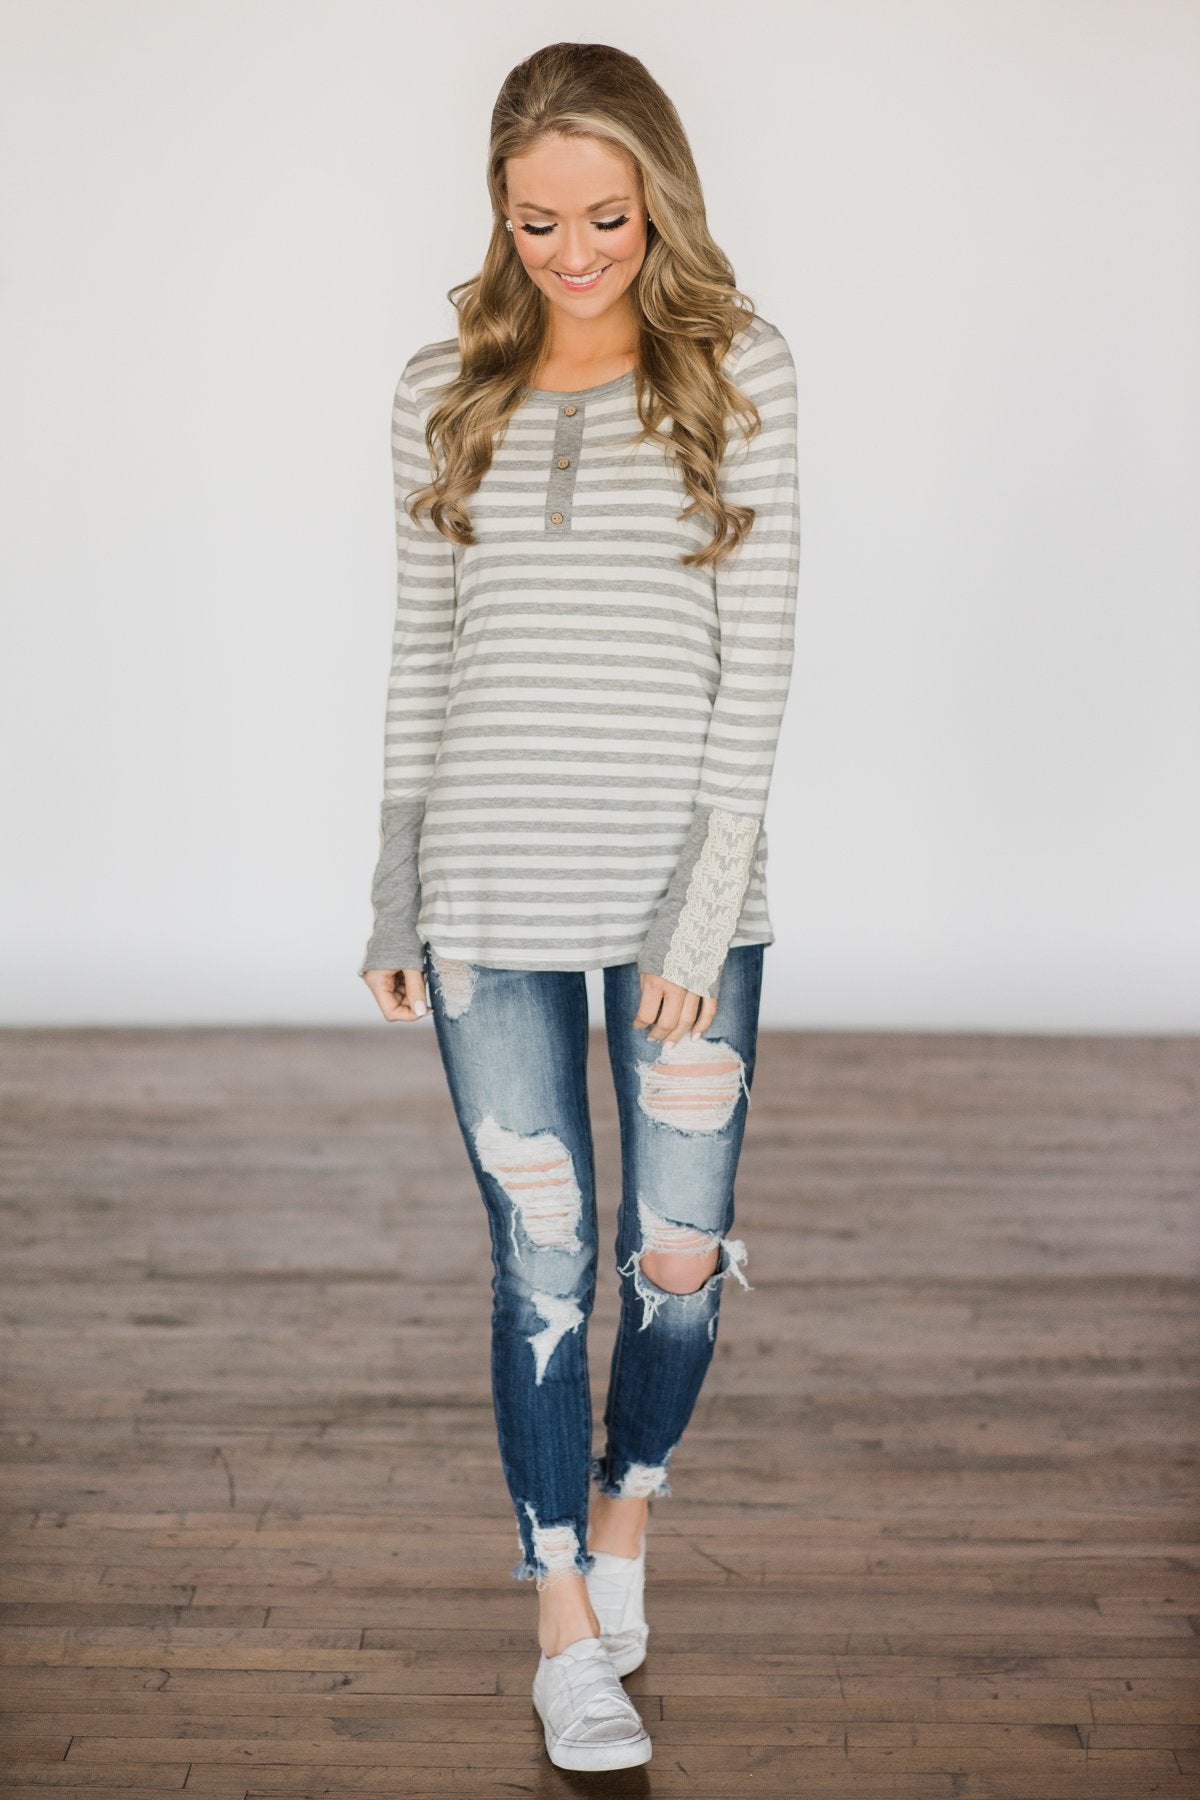 A Touch Of Lace Grey Striped Top